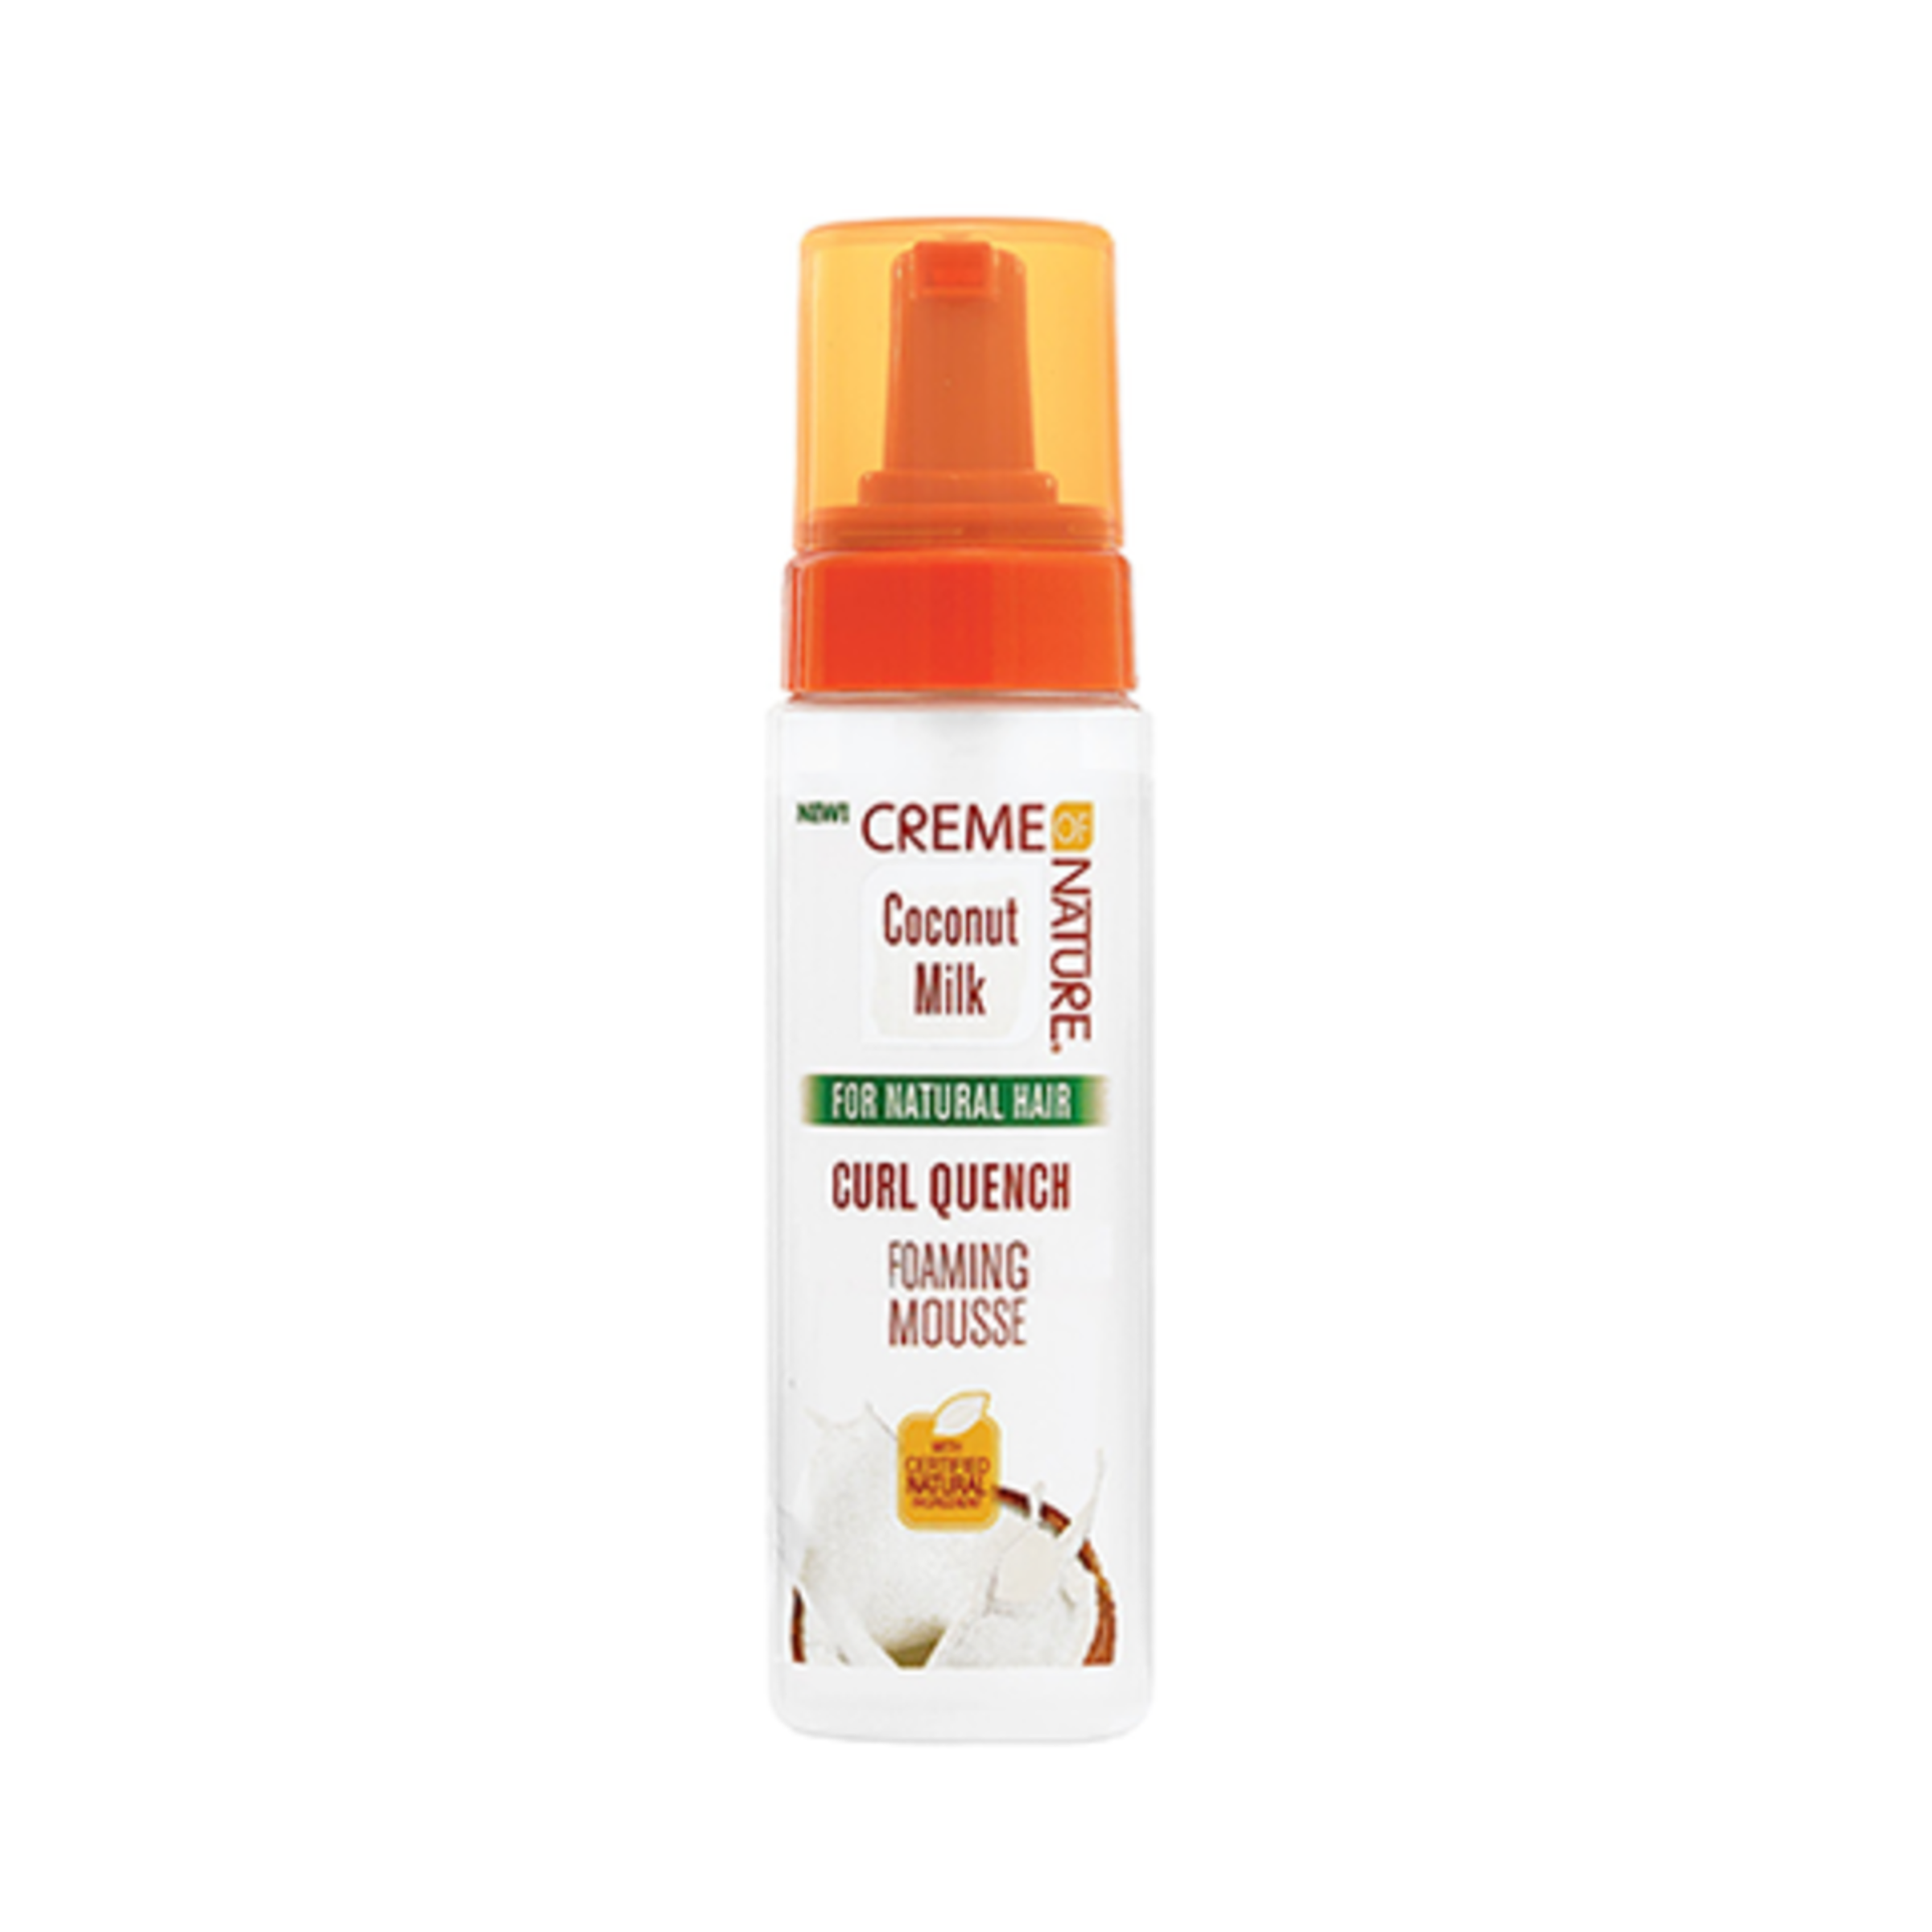 Creme of Nature - Curl Quench Foaming Mousse / 7 oz.